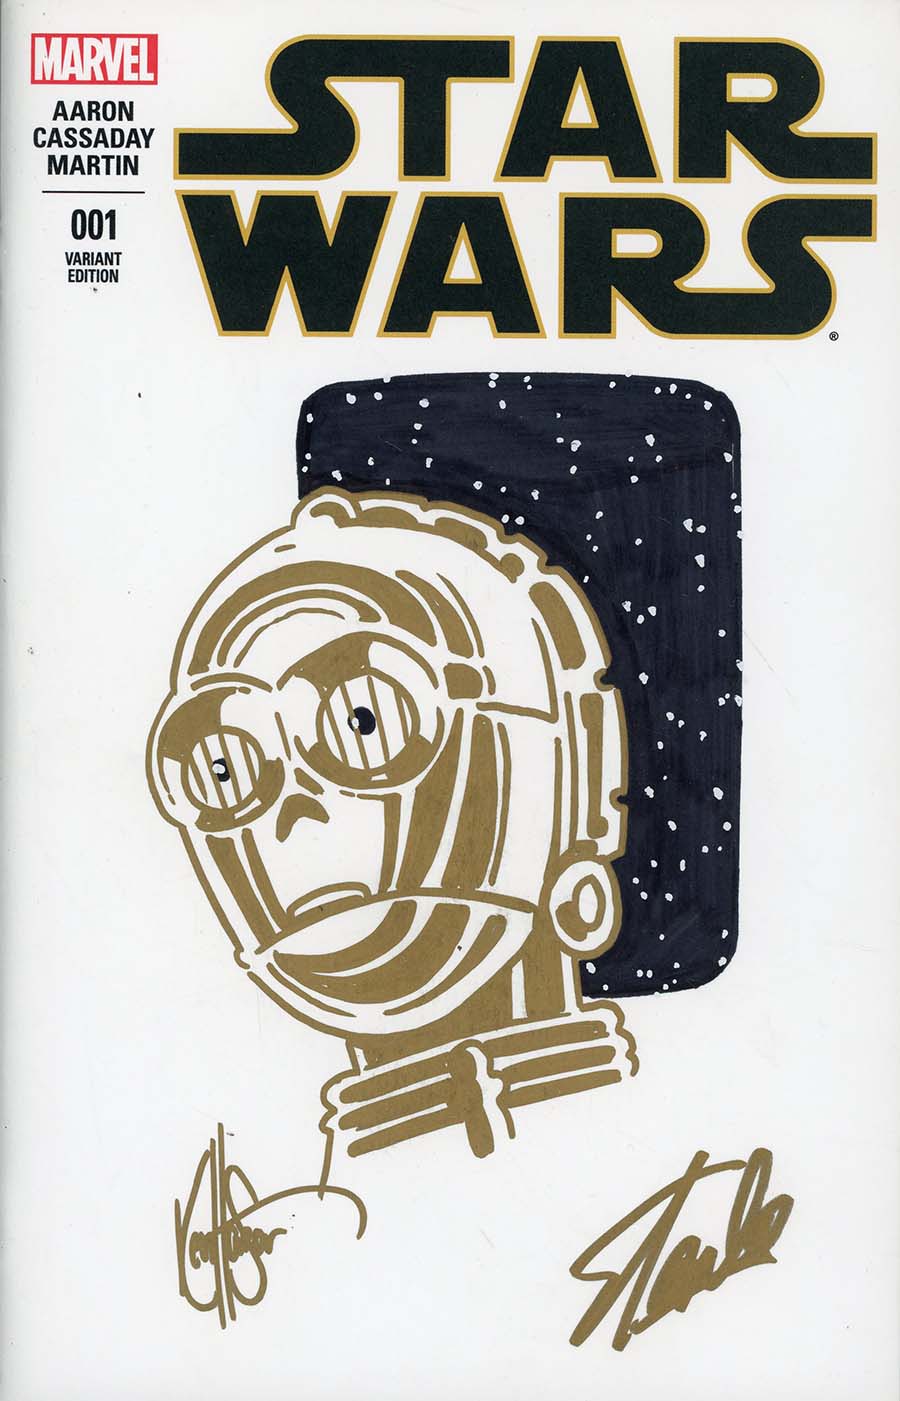 Star Wars Vol 4 #1 Cover Z-Z-Z-H DF DF Signed By Stan Lee & Remarked With A Character Hand-Drawn Sketch By Ken Haeser